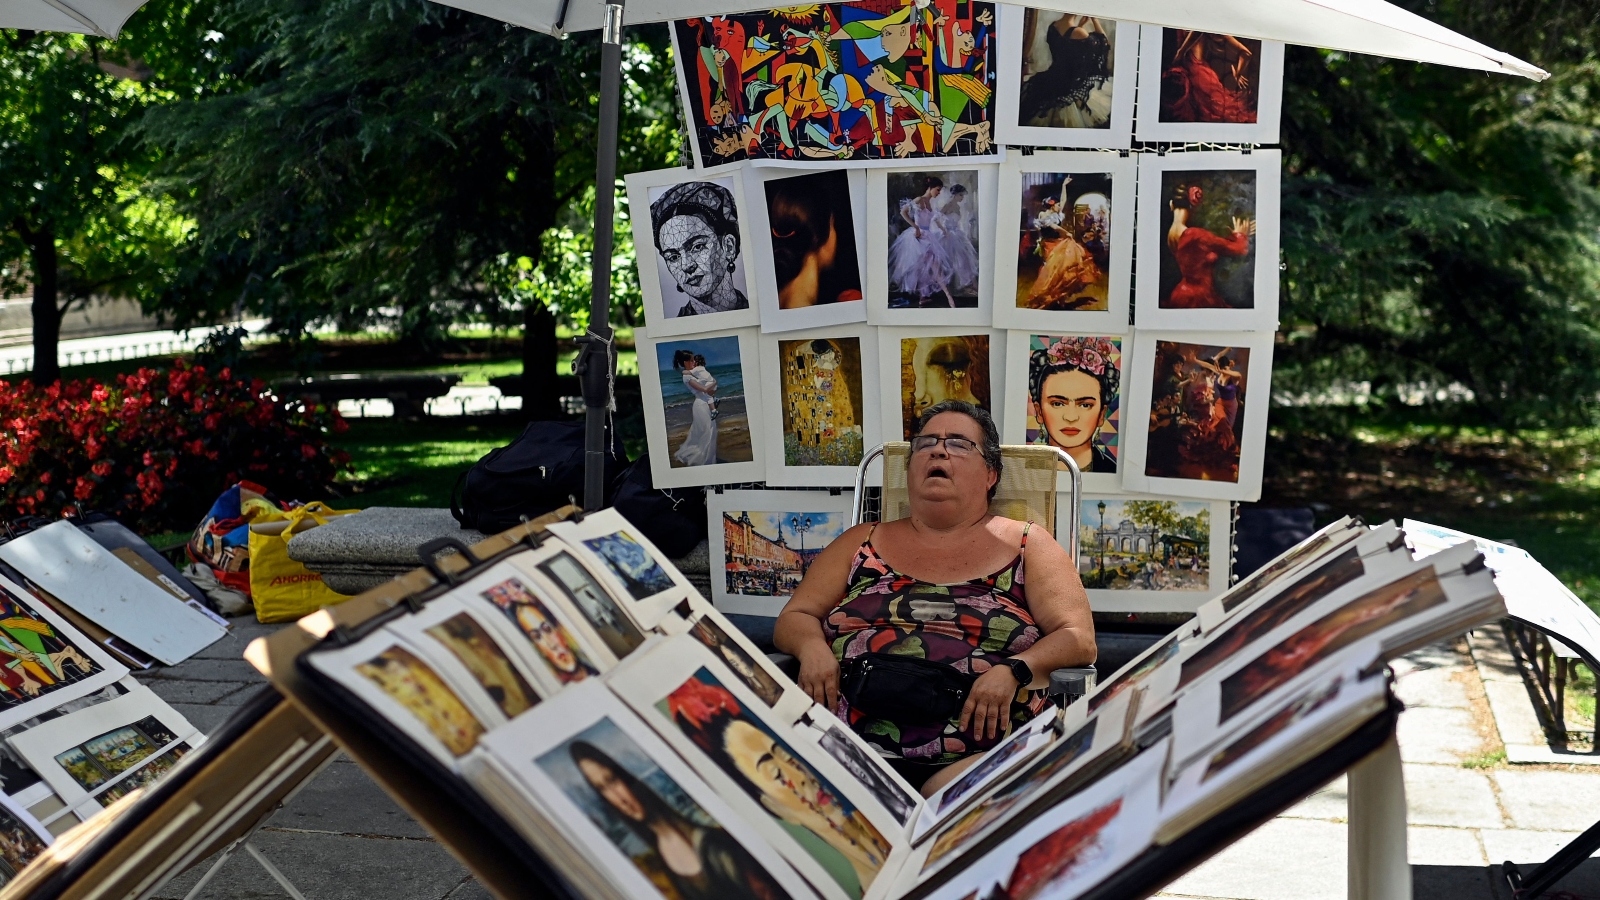 An art seller naps near her outside stand, filled with prints from artists like Frida Kahlo, Gustav Klimt, and Pablo Picasso